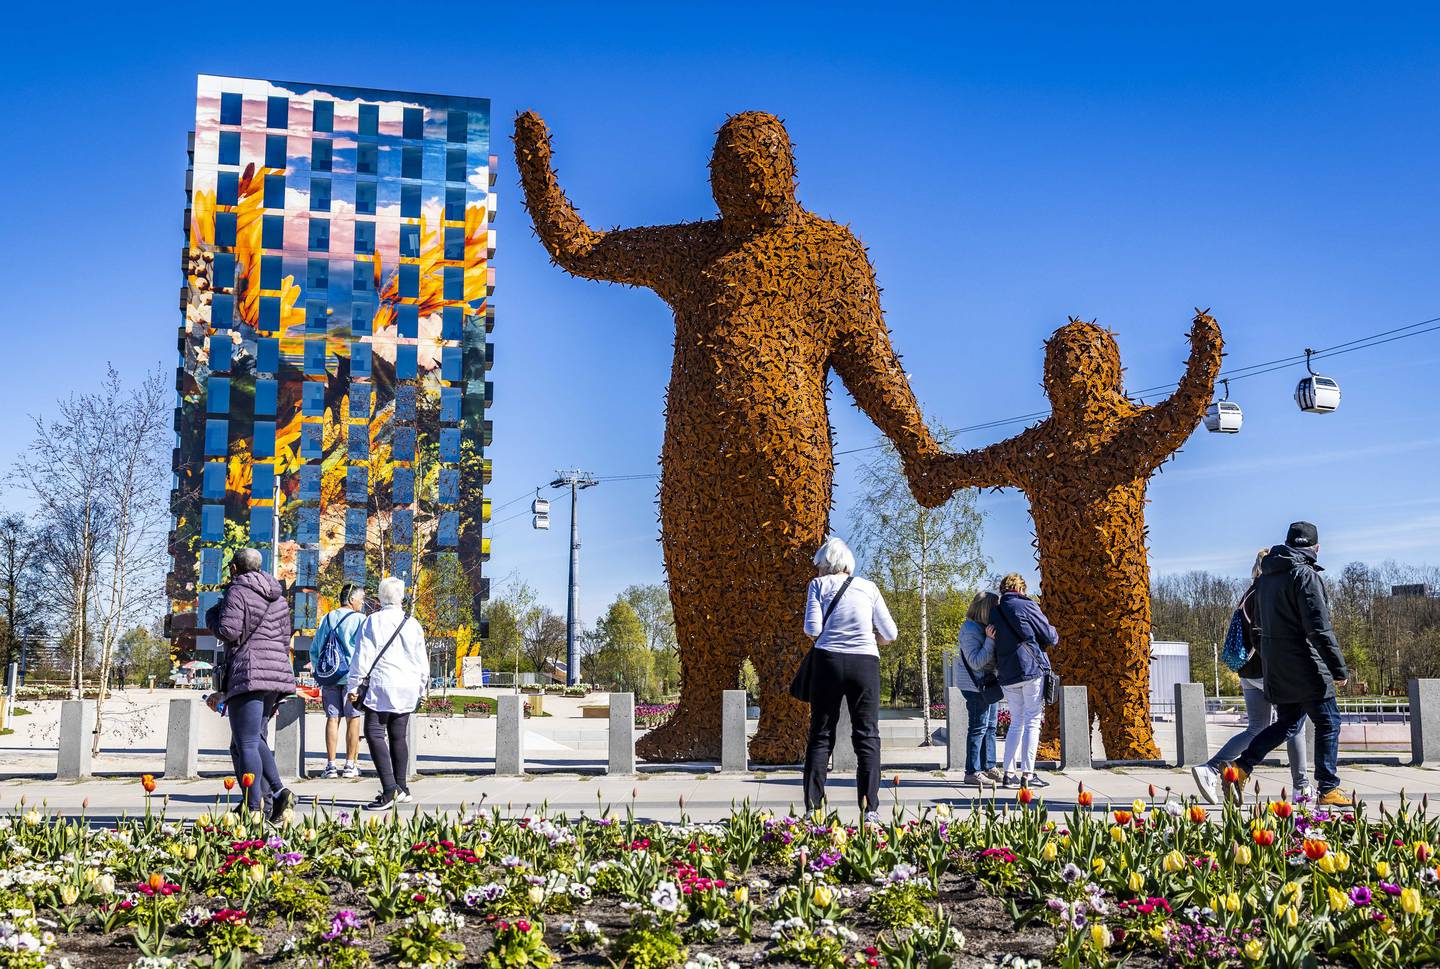 Visitors to the Floriade Expo 2022 in Almere, the Netherlands, in April. The World Horticultural Exhibition is held once every 10 years, each time in a different location. EPA 